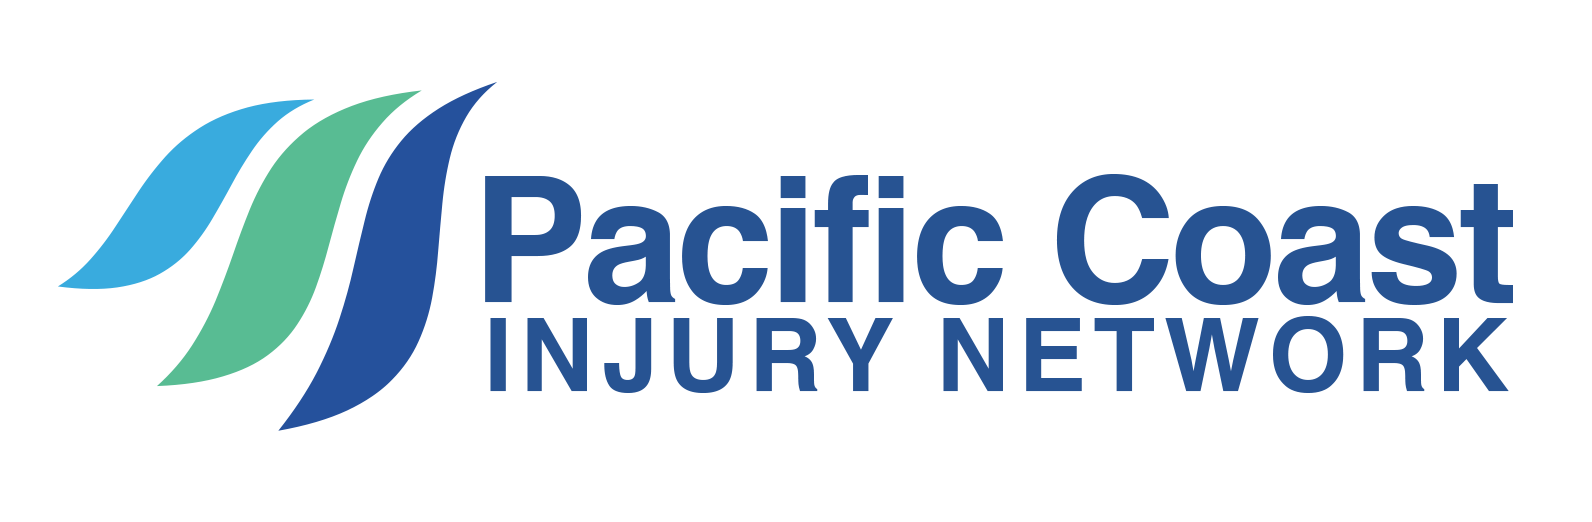 Pacific Coast Injury Network - Doctors on lien